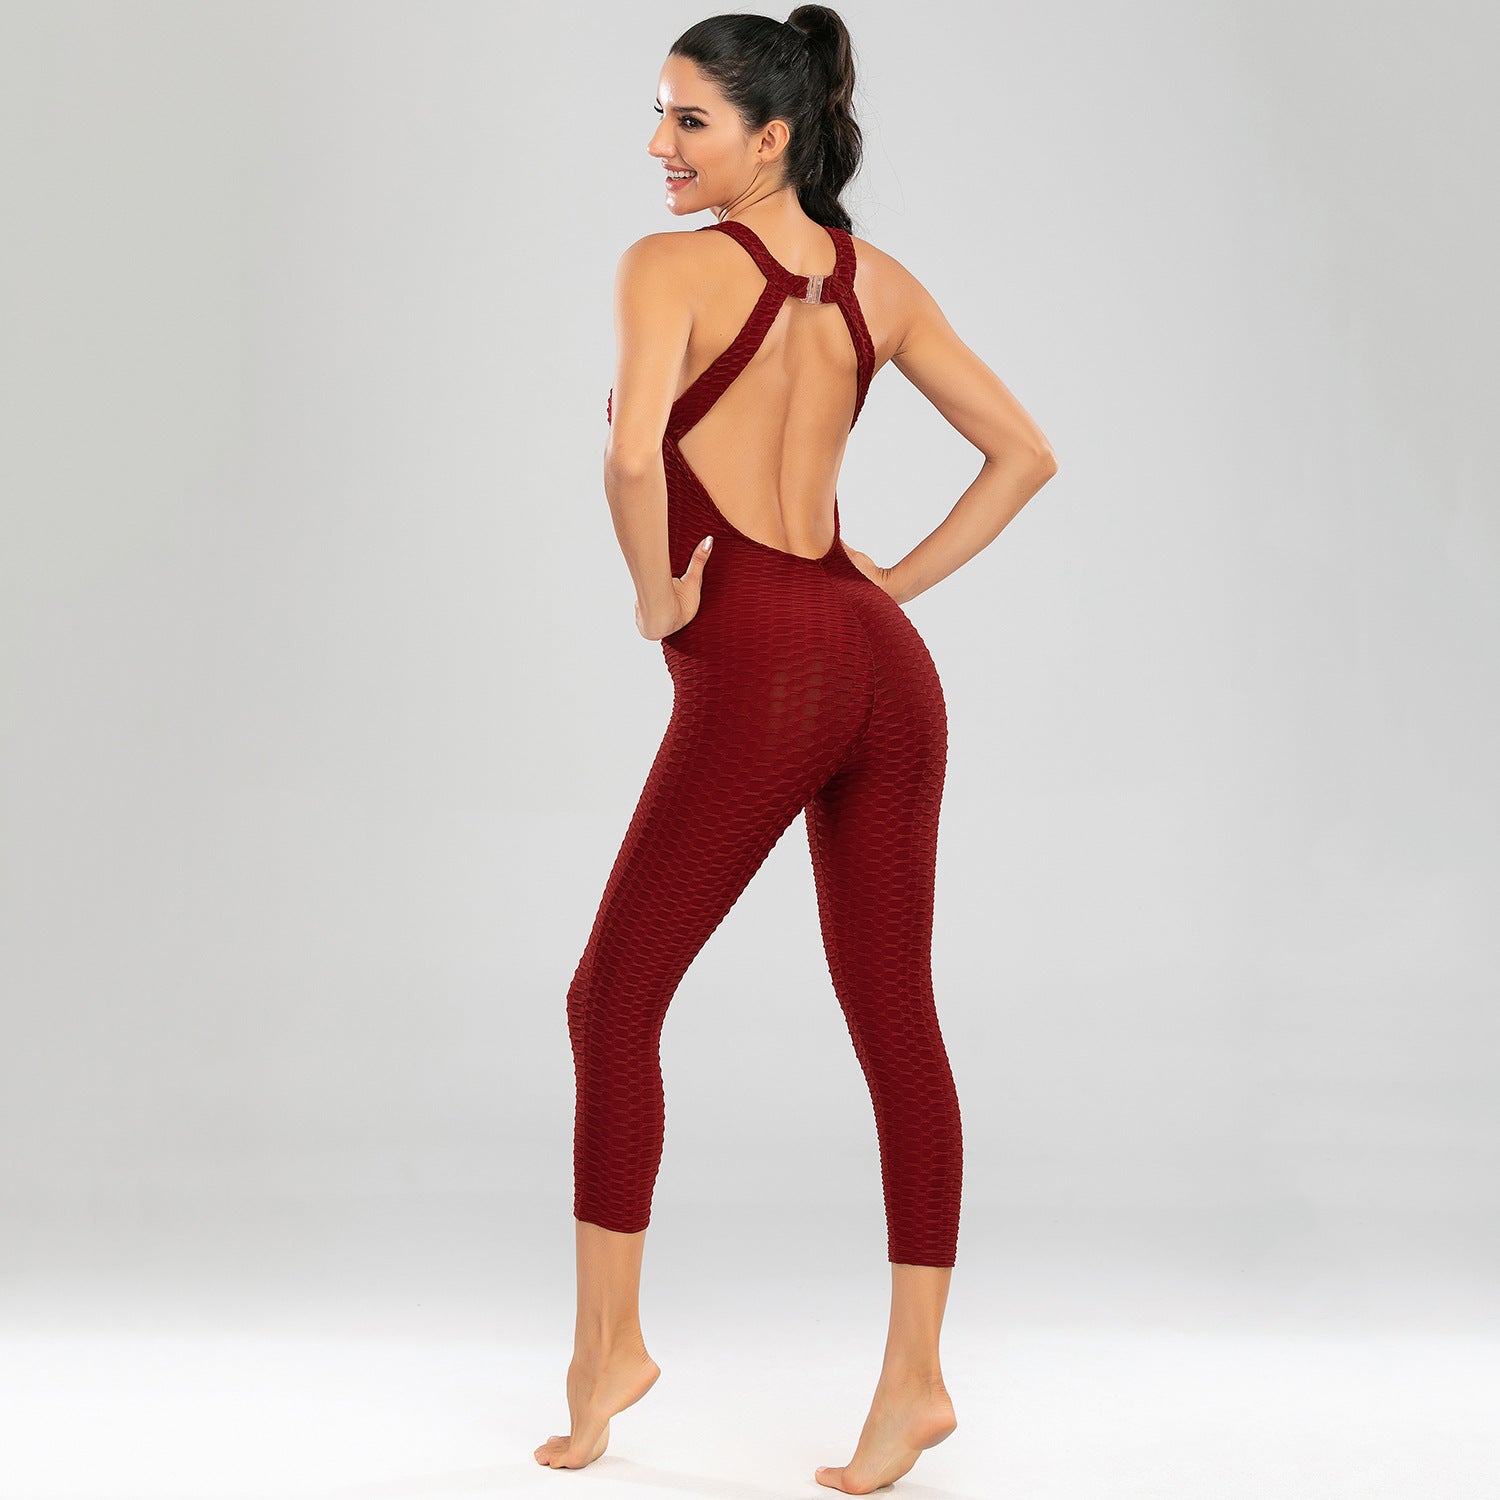 Sexy Elastic Exercising Yoga Jumpsuits for Women-Activewear-Wine Red-S-Free Shipping Leatheretro